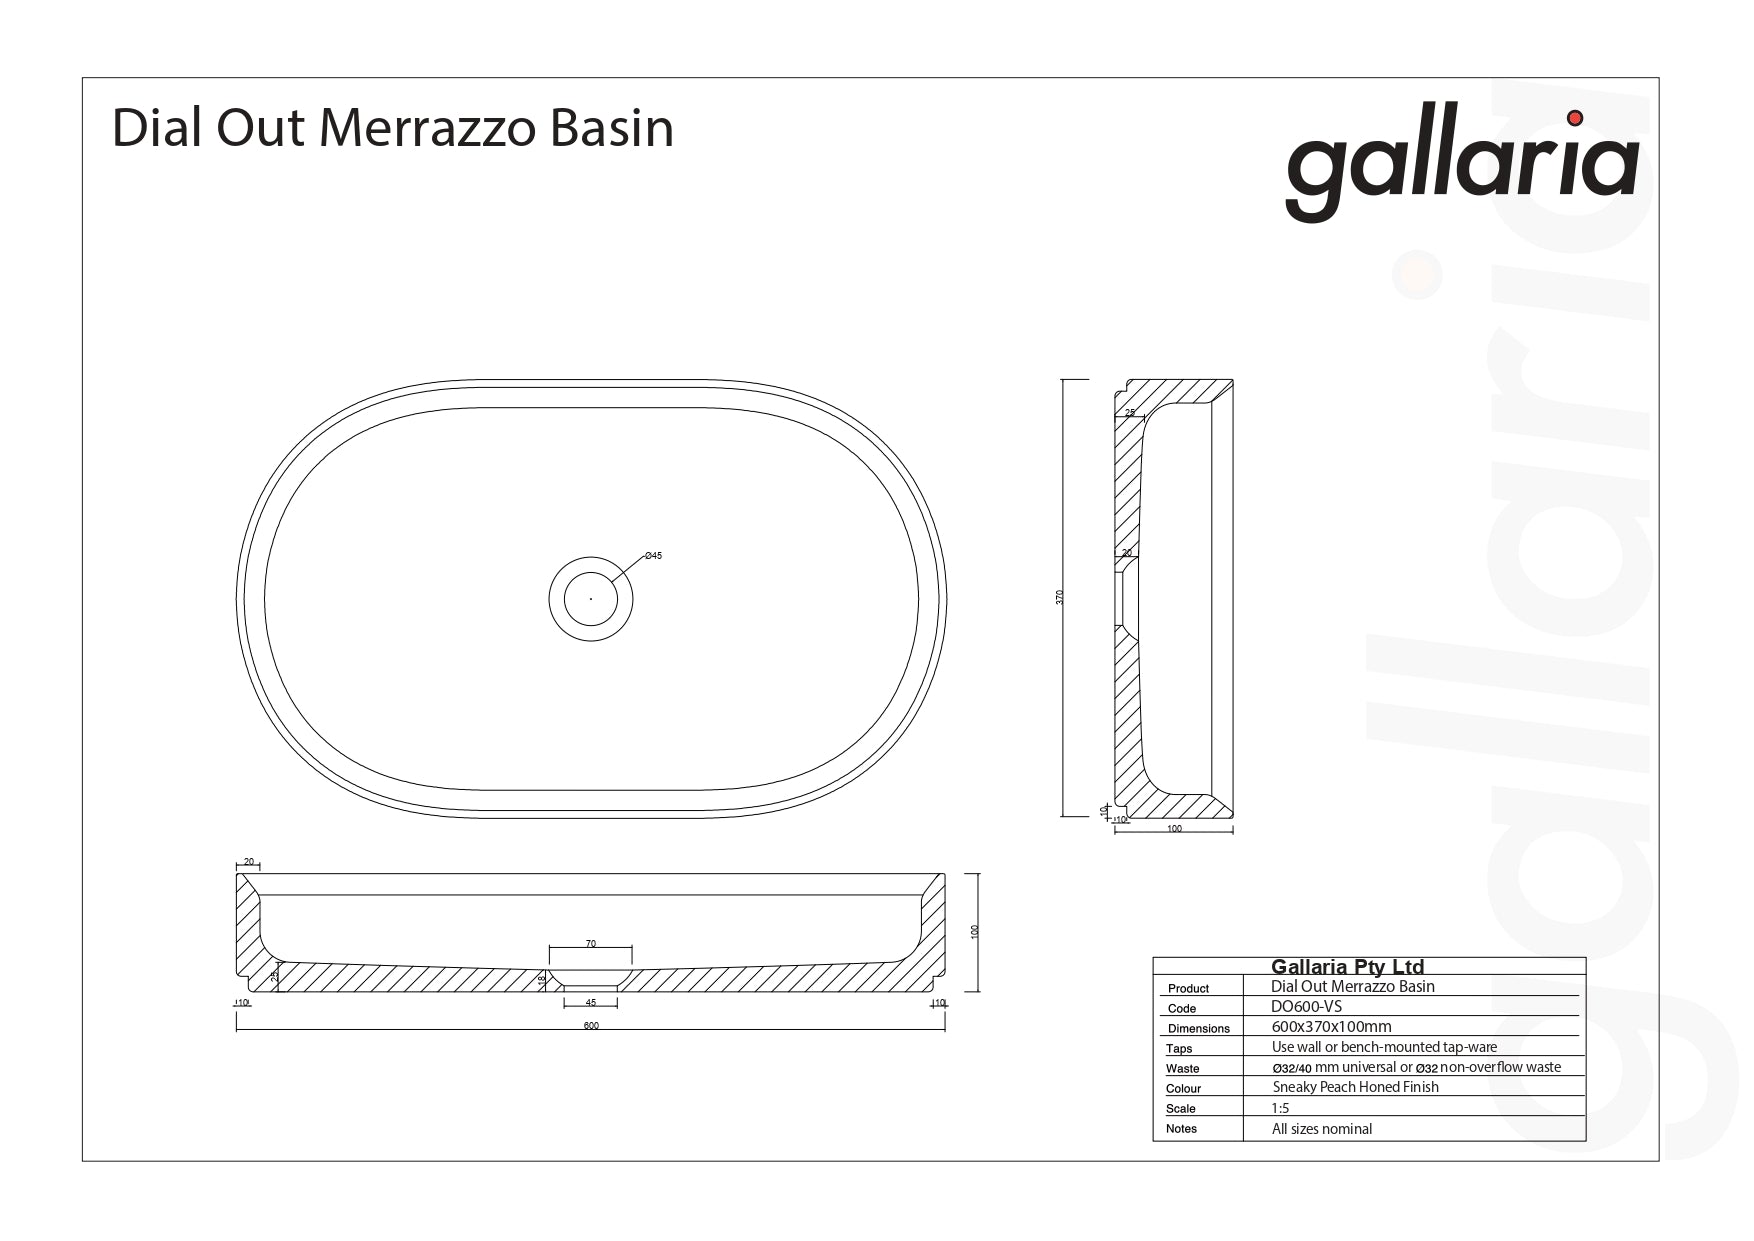 GALLARIA DIAL OUT MERRAZZO OVAL ABOVE COUNTER STONE BASIN SNEAKY PEACH 600MM